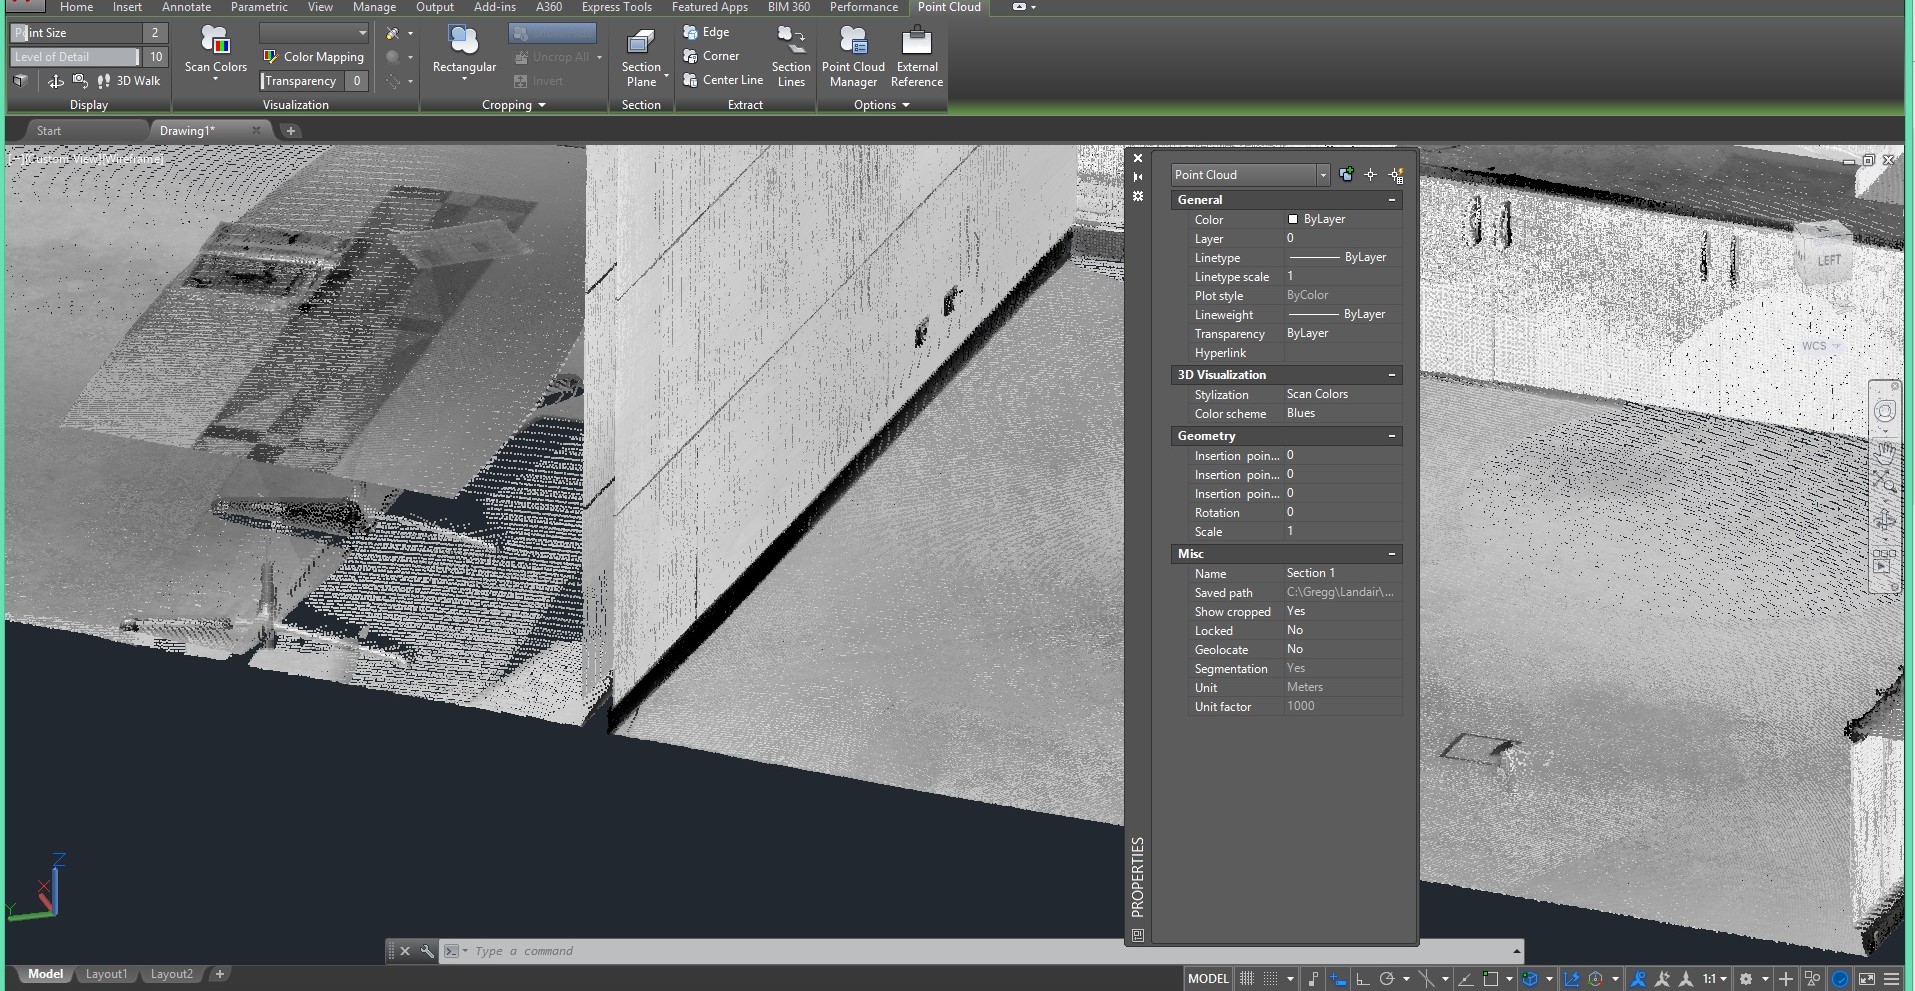 Use of UCS in AutoCAD with Point Cloud